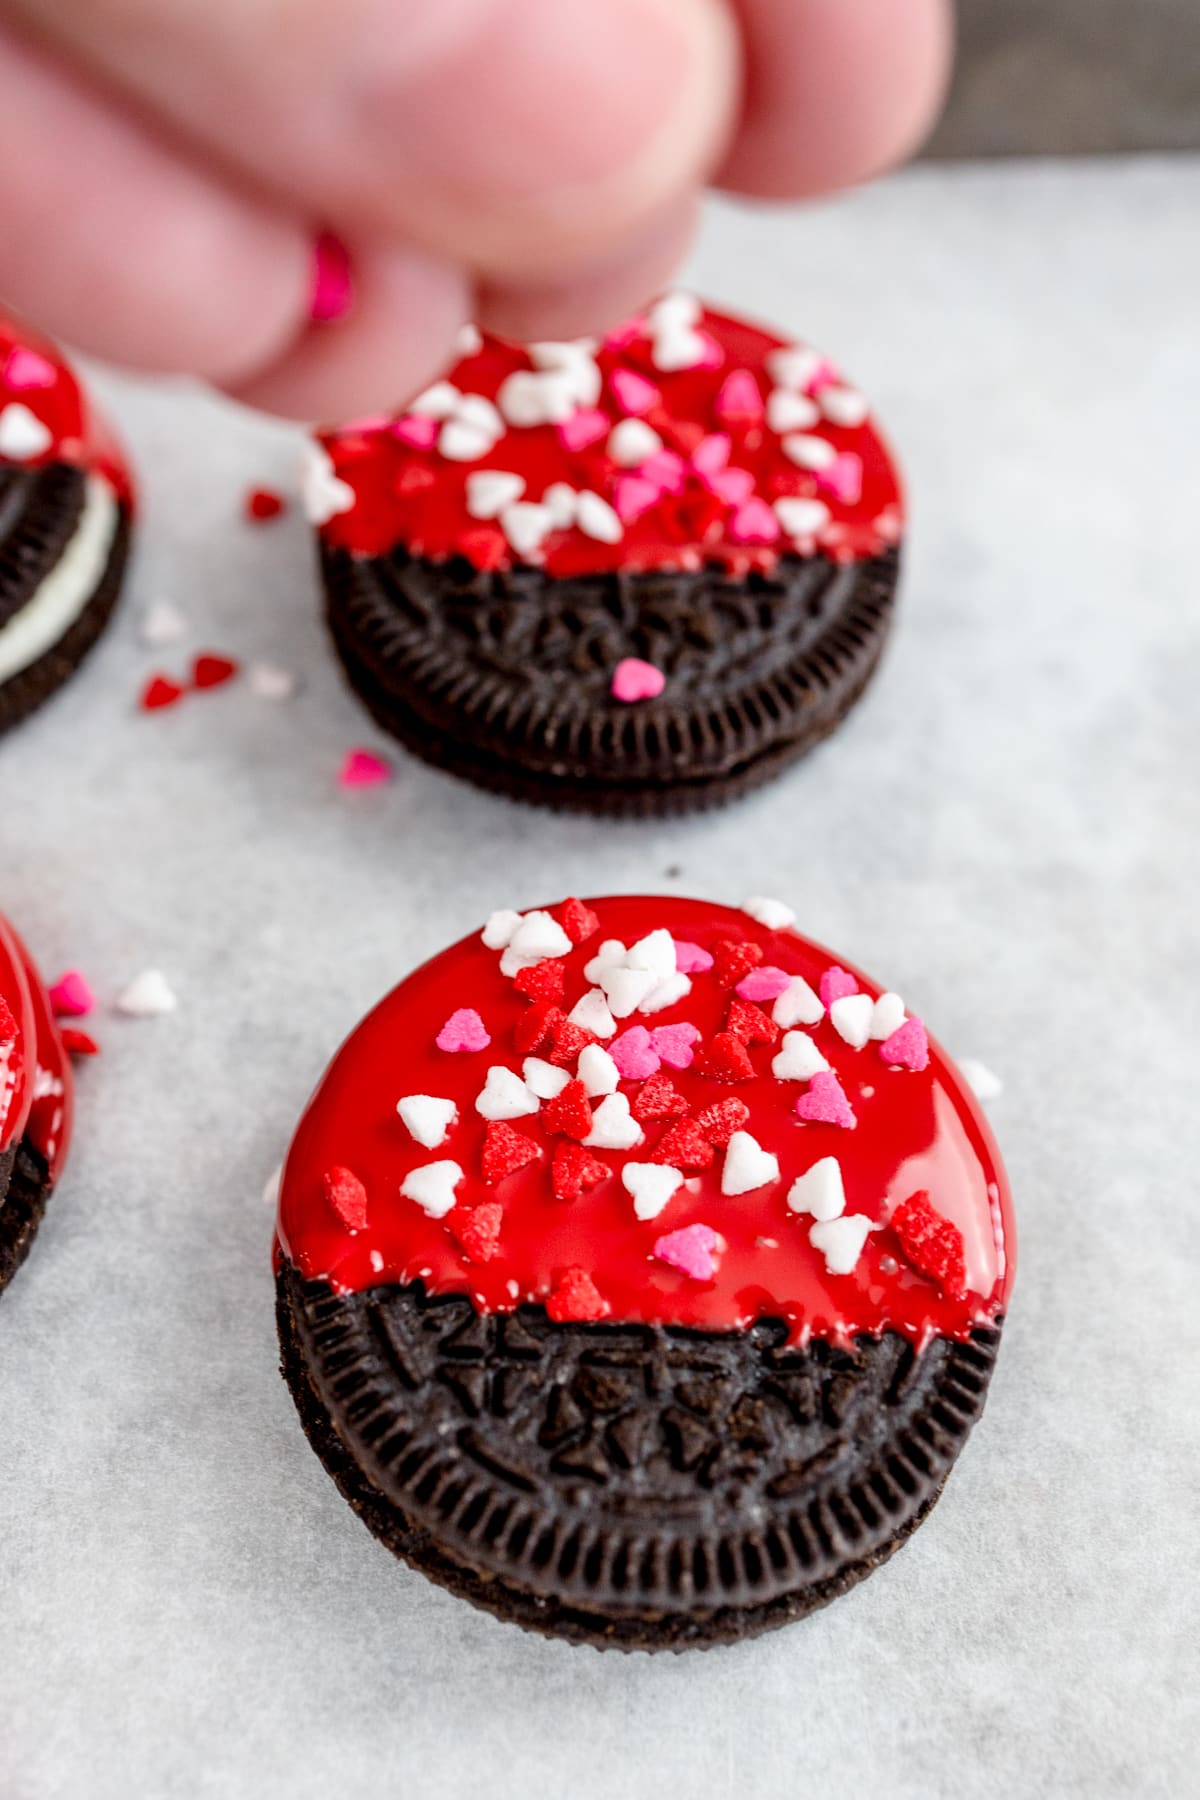 Top view of Oreo cookies half covered with red icing, with heart-shaped sprinkles on the icing. 